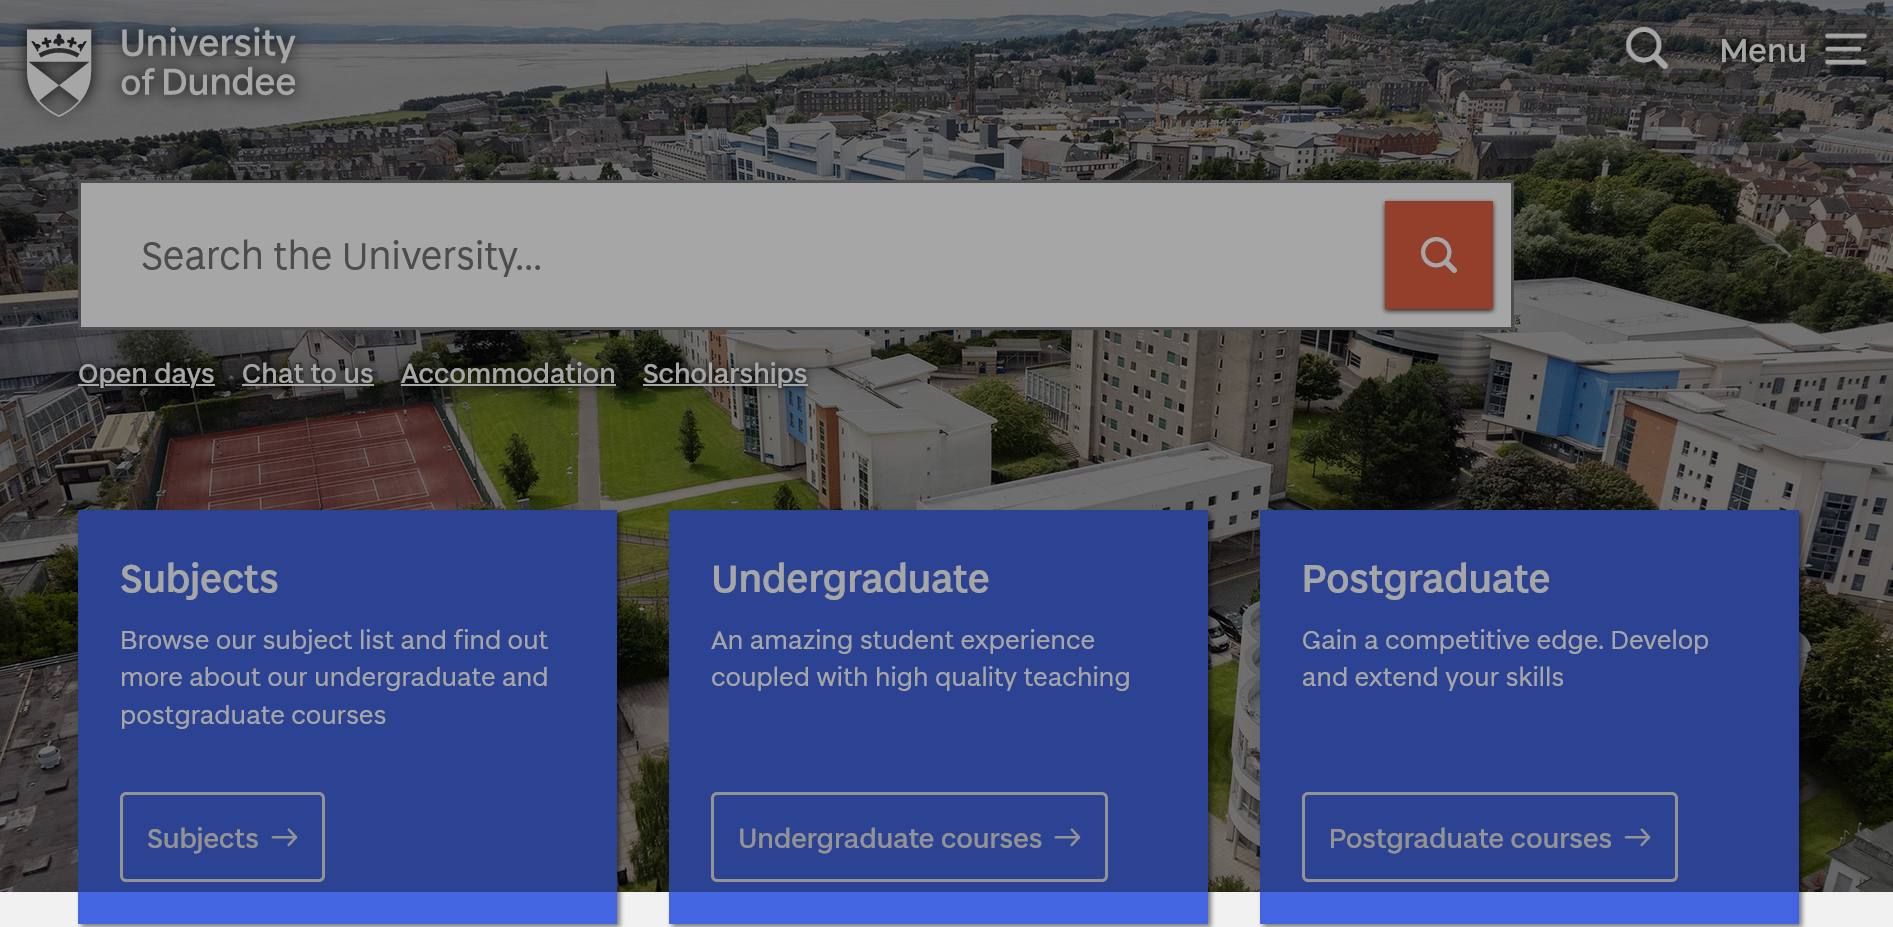 University of Dundee Undergraduate Scholarships for Applicants from Africa